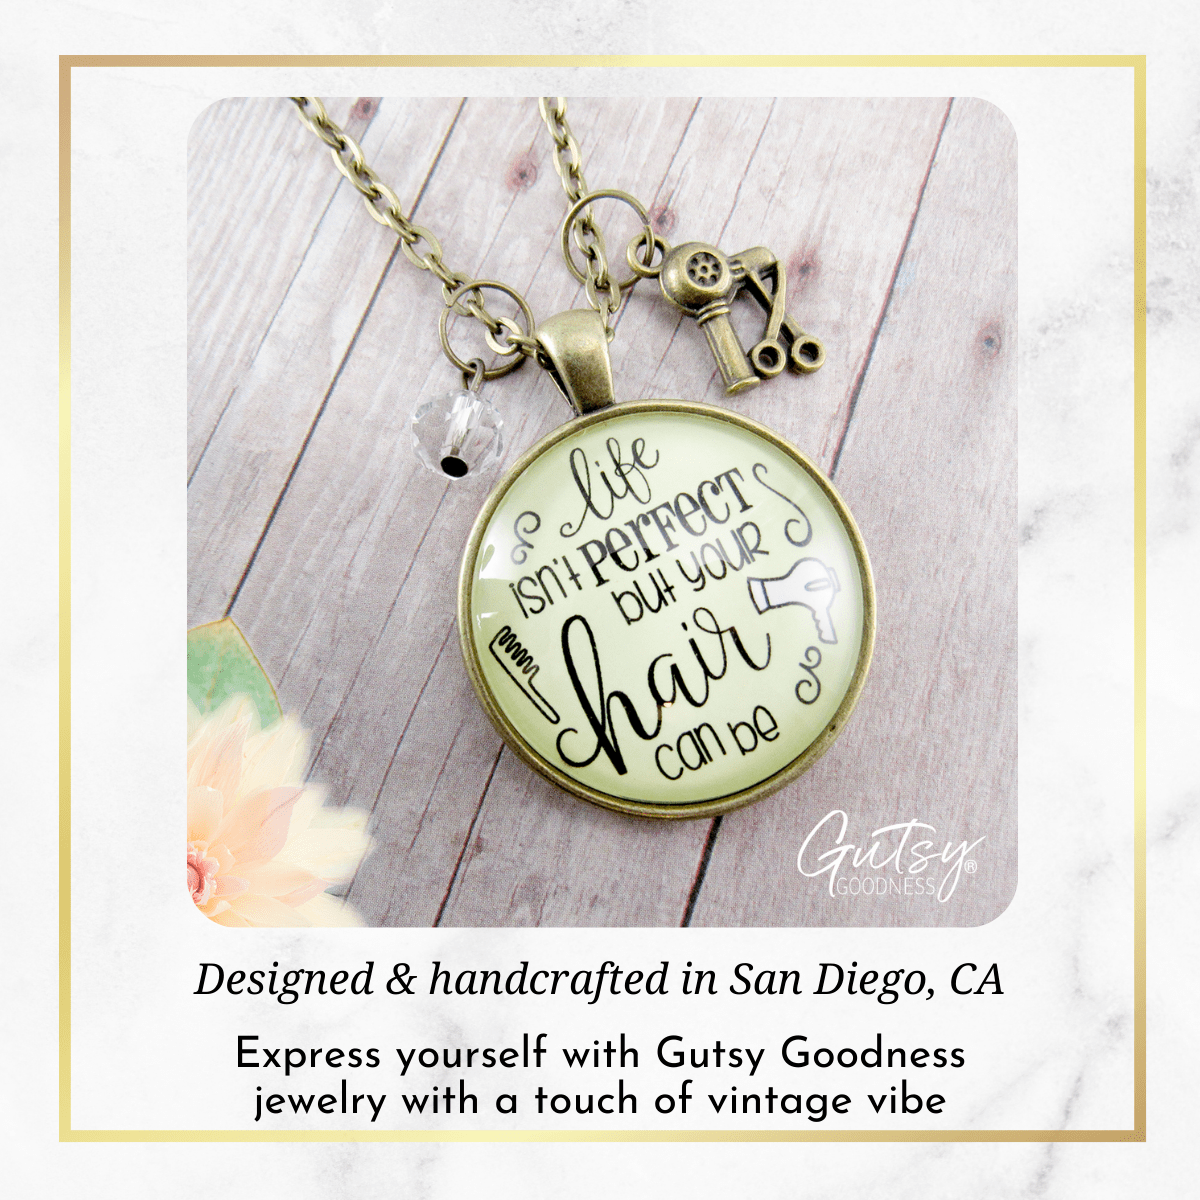 Gutsy Goodness Beautician Necklace Life Isn't Perfect But Hair Stylist Charm Jewelry - Gutsy Goodness Handmade Jewelry;Beautician Necklace Life Isn't Perfect But Hair Stylist Charm Jewelry - Gutsy Goodness Handmade Jewelry Gifts